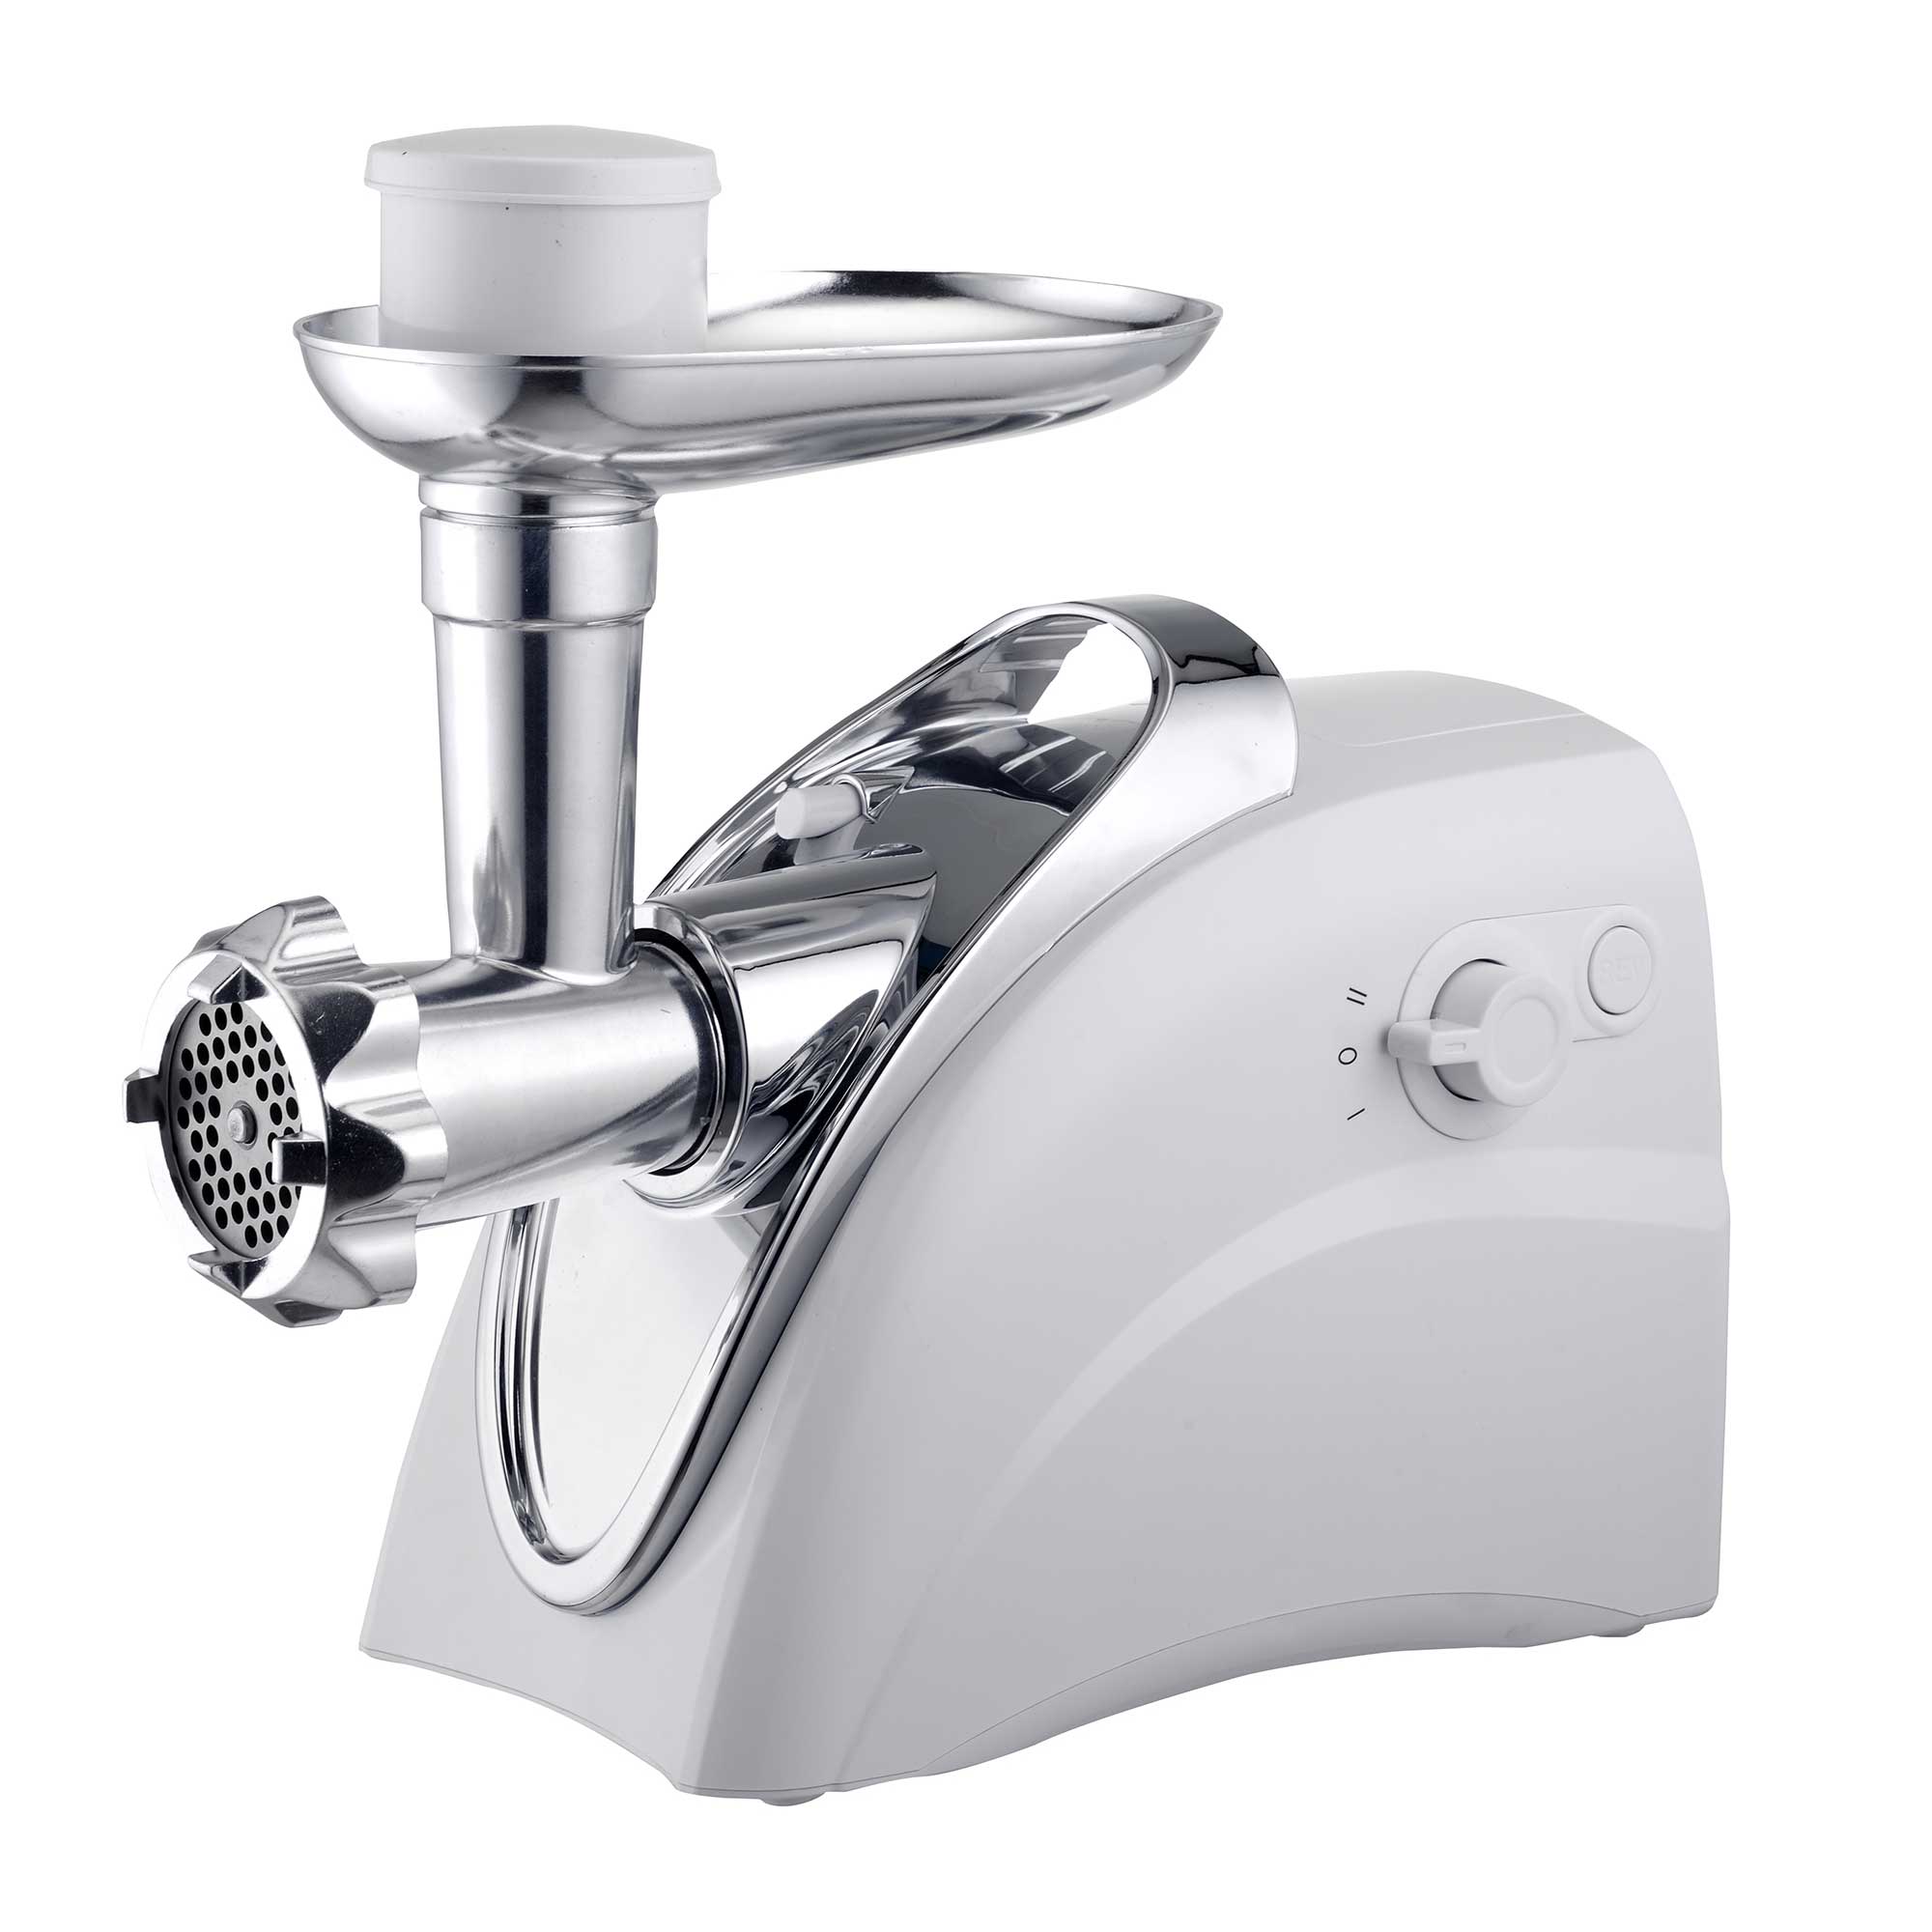 Electric Meat Grinder - Specialty Countertop Appliances